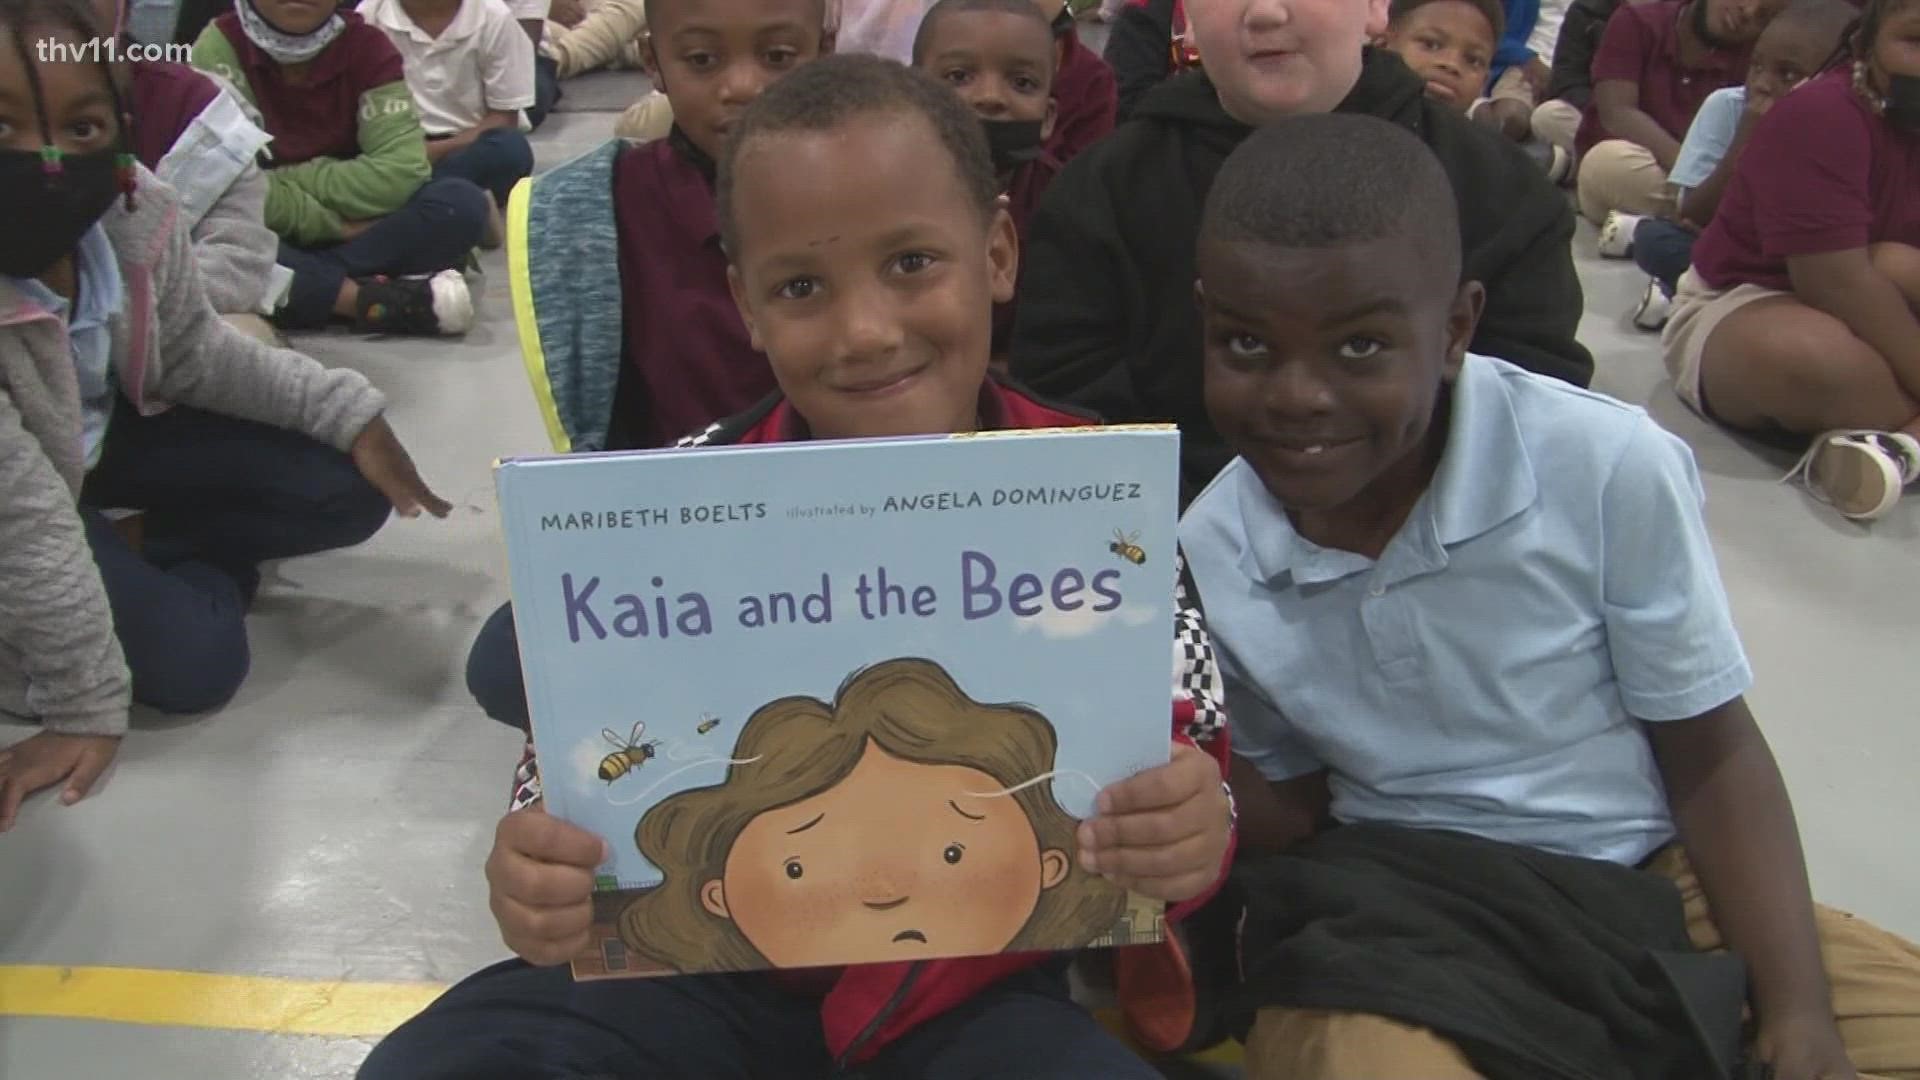 Craig O'Neill continued his Reading Roadtrip this time with 2nd graders at L.L. Elementary Elementary to read Kaia and the Bees.